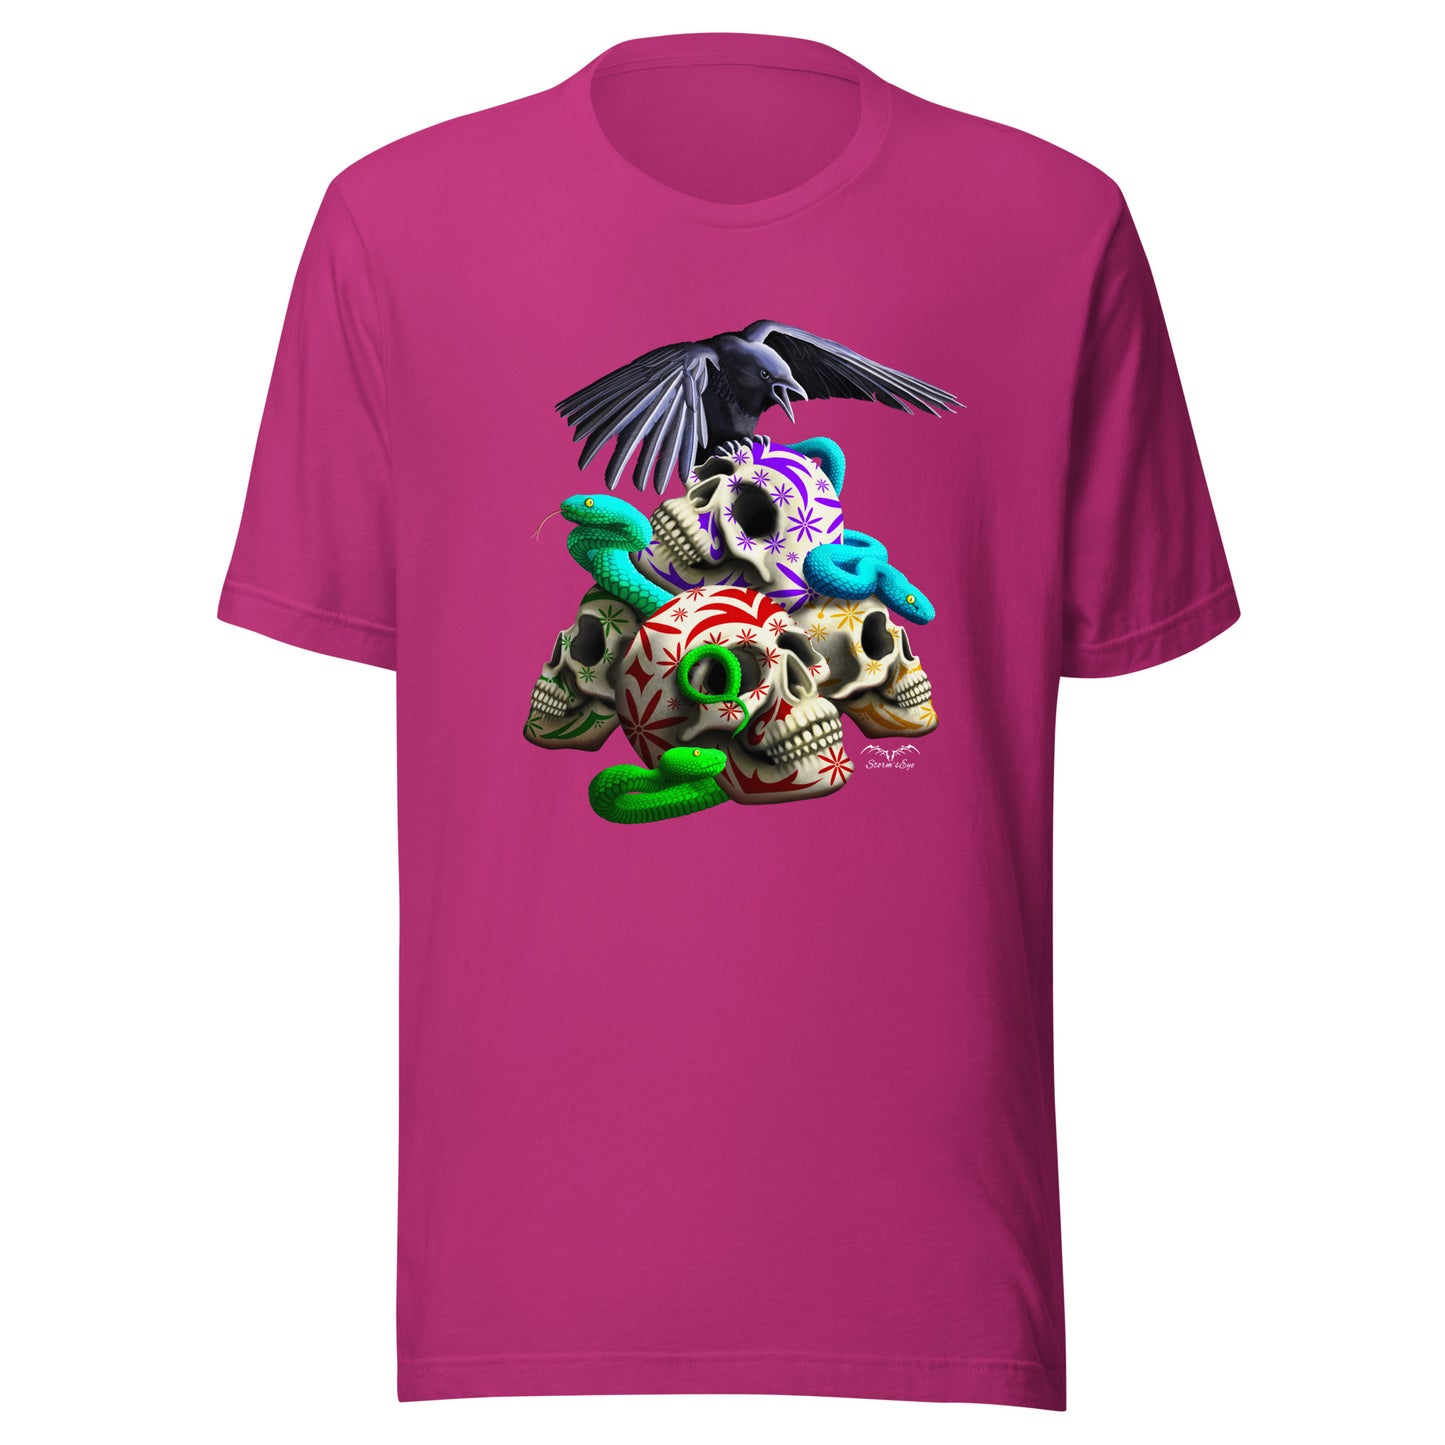 stormseye design gothic sugar skulls and snakes T shirt flat view pink